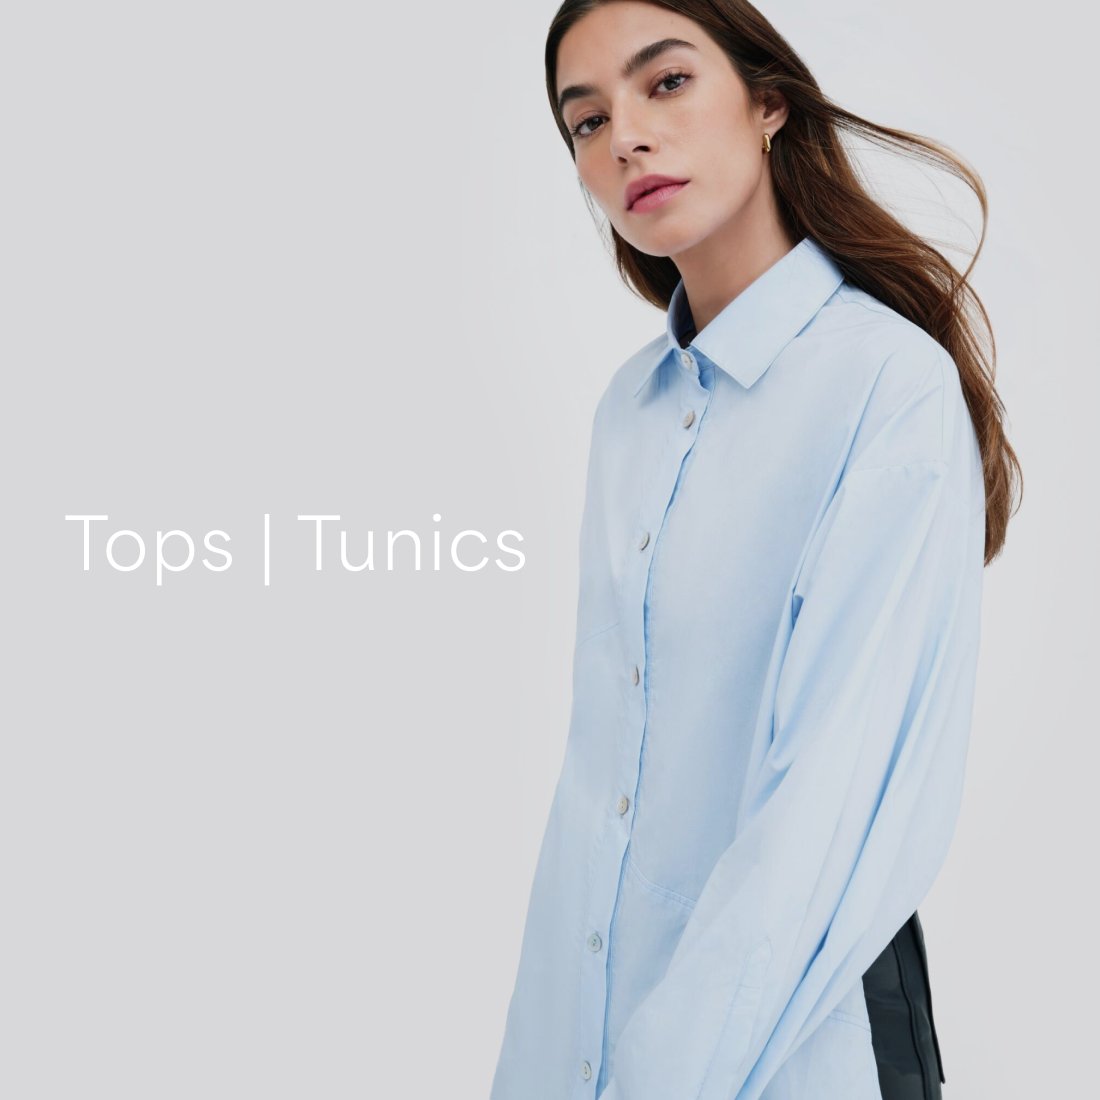 Women's Tops and Blouses - Minimalist Edgy Blouses